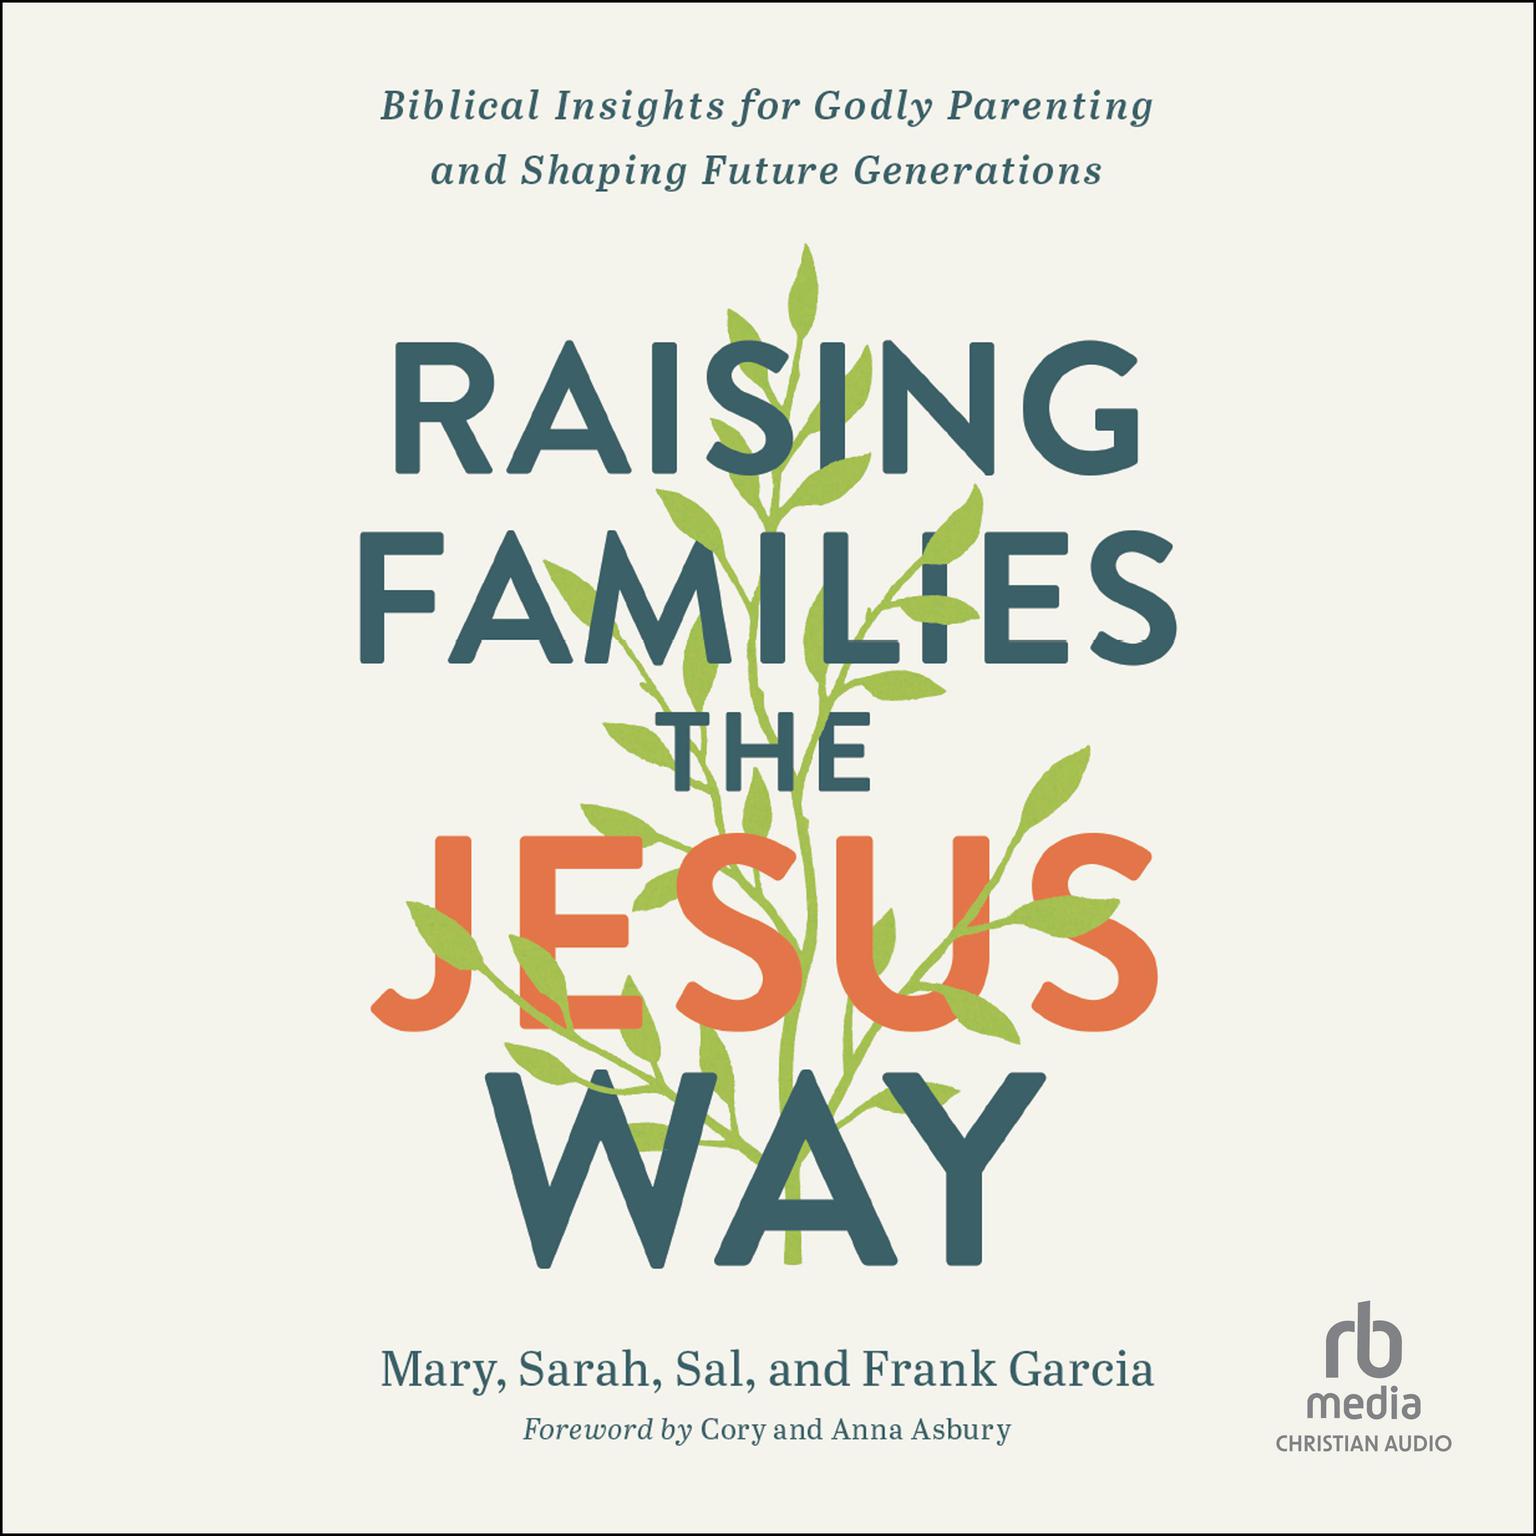 Raising Families the Jesus Way: Biblical Insights for Godly Parenting and Shaping Future Generations Audiobook, by Frank Garcia